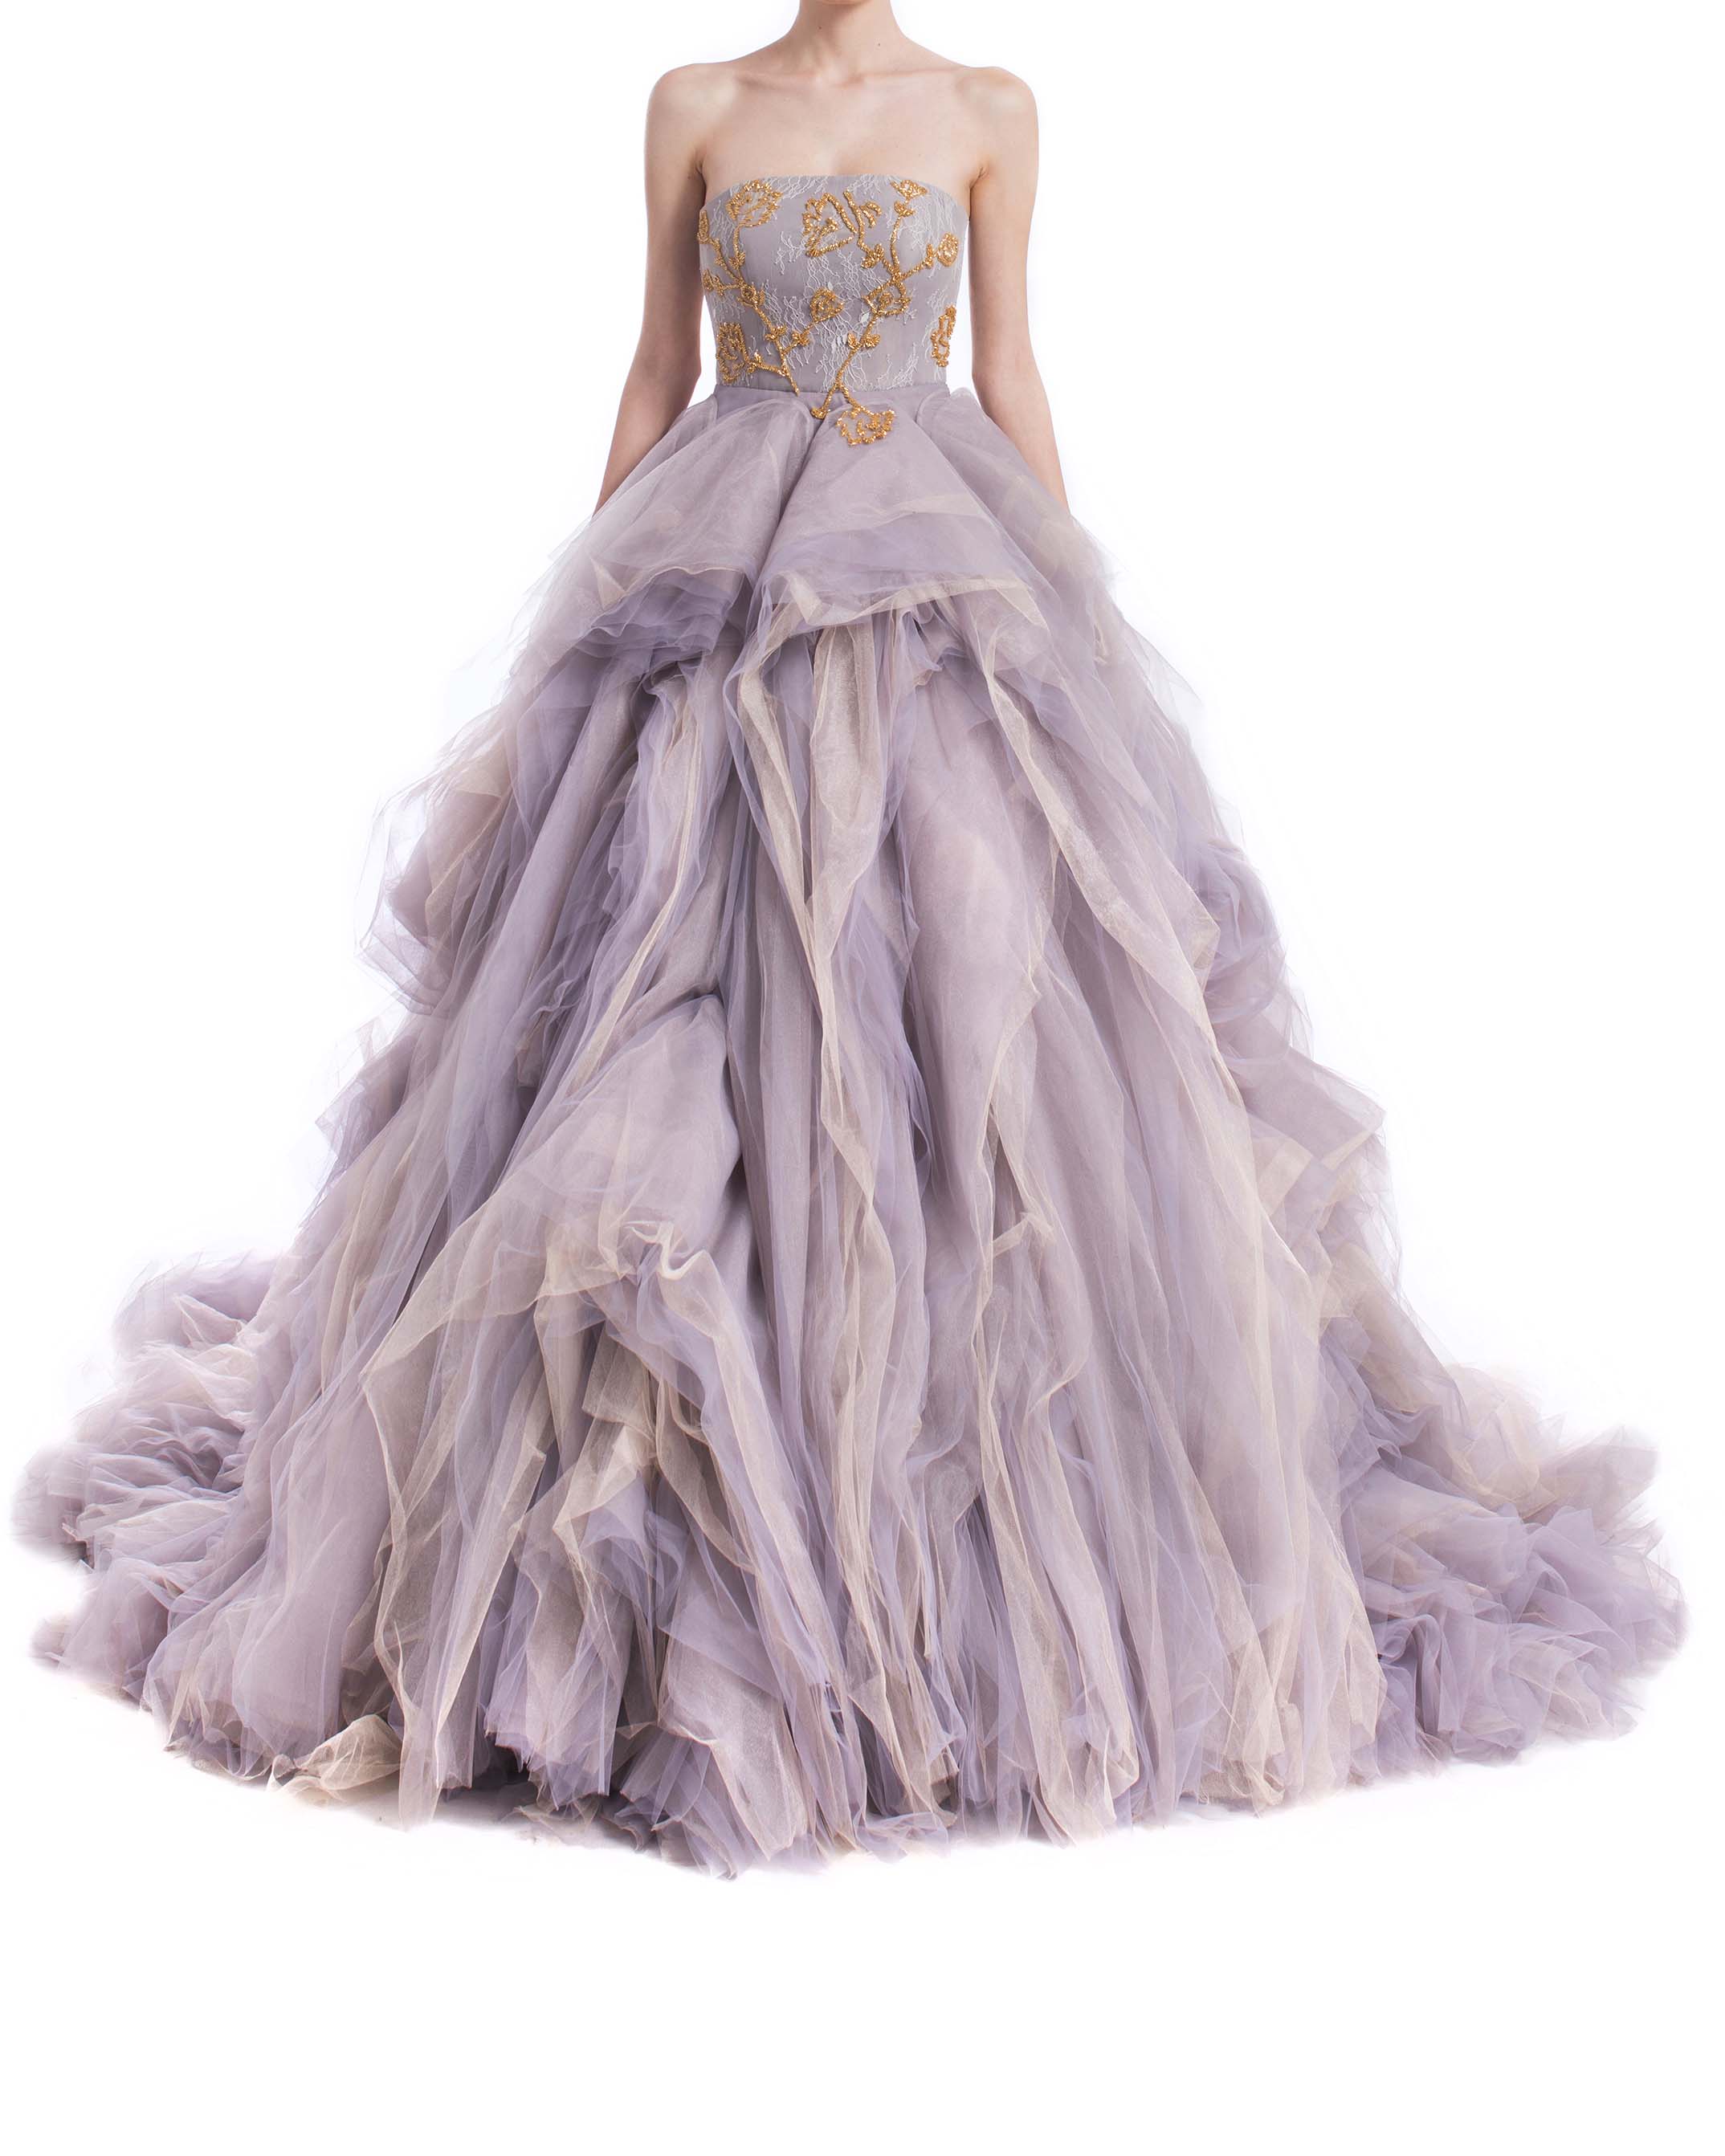 Tulle gown embroidered corset gown